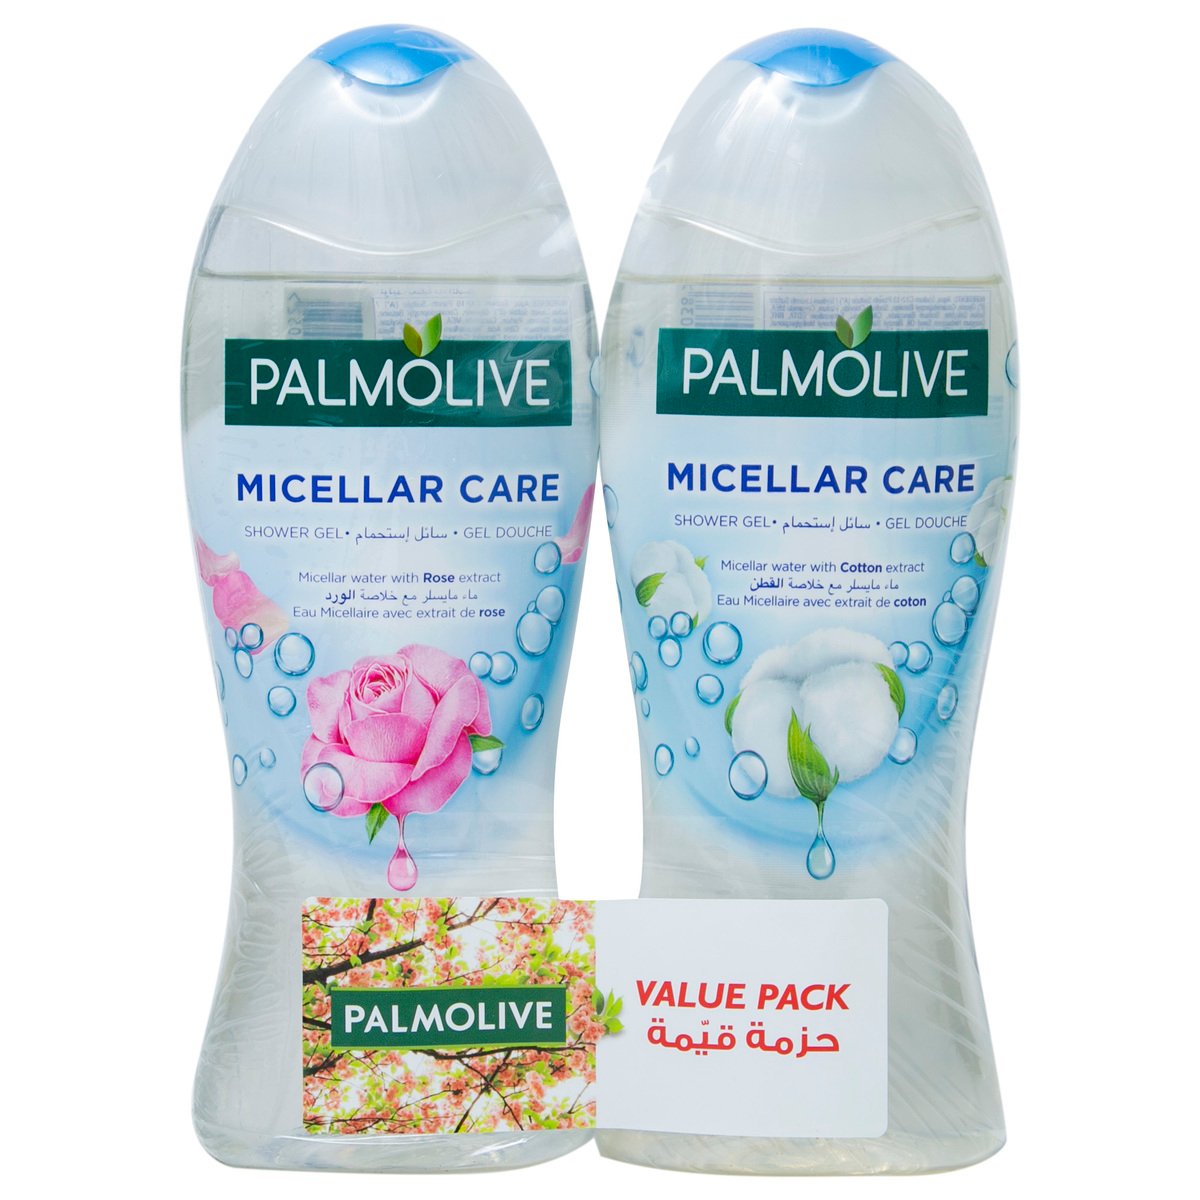 Palmolive Micellar Care Shower Gel Assorted 2 x 500 ml